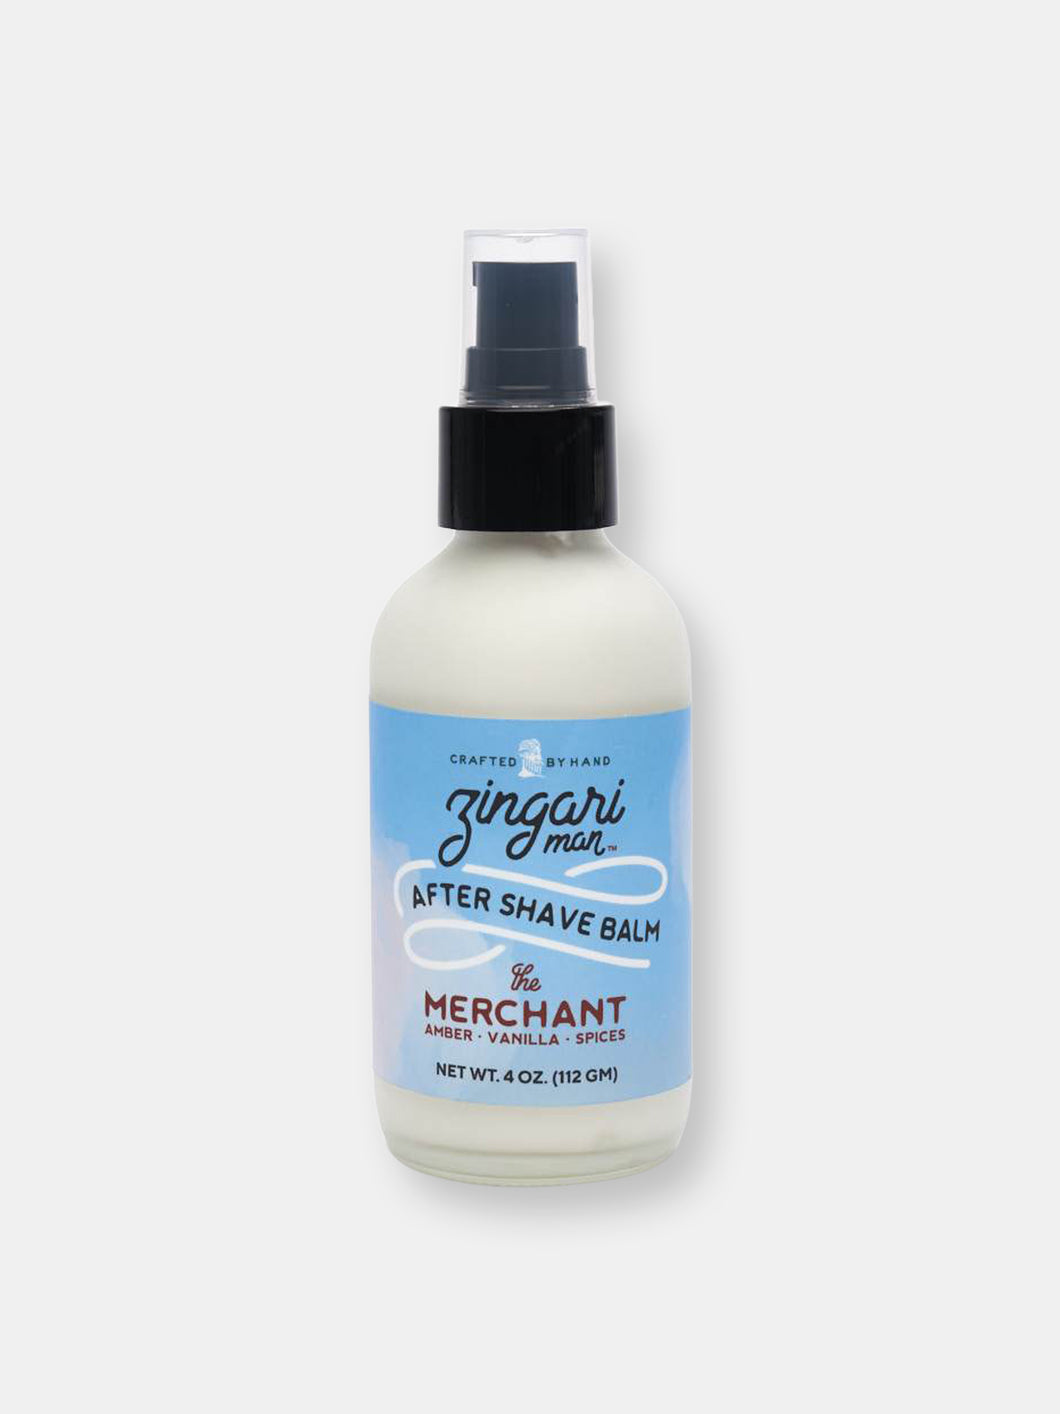 The Merchant After shave balm